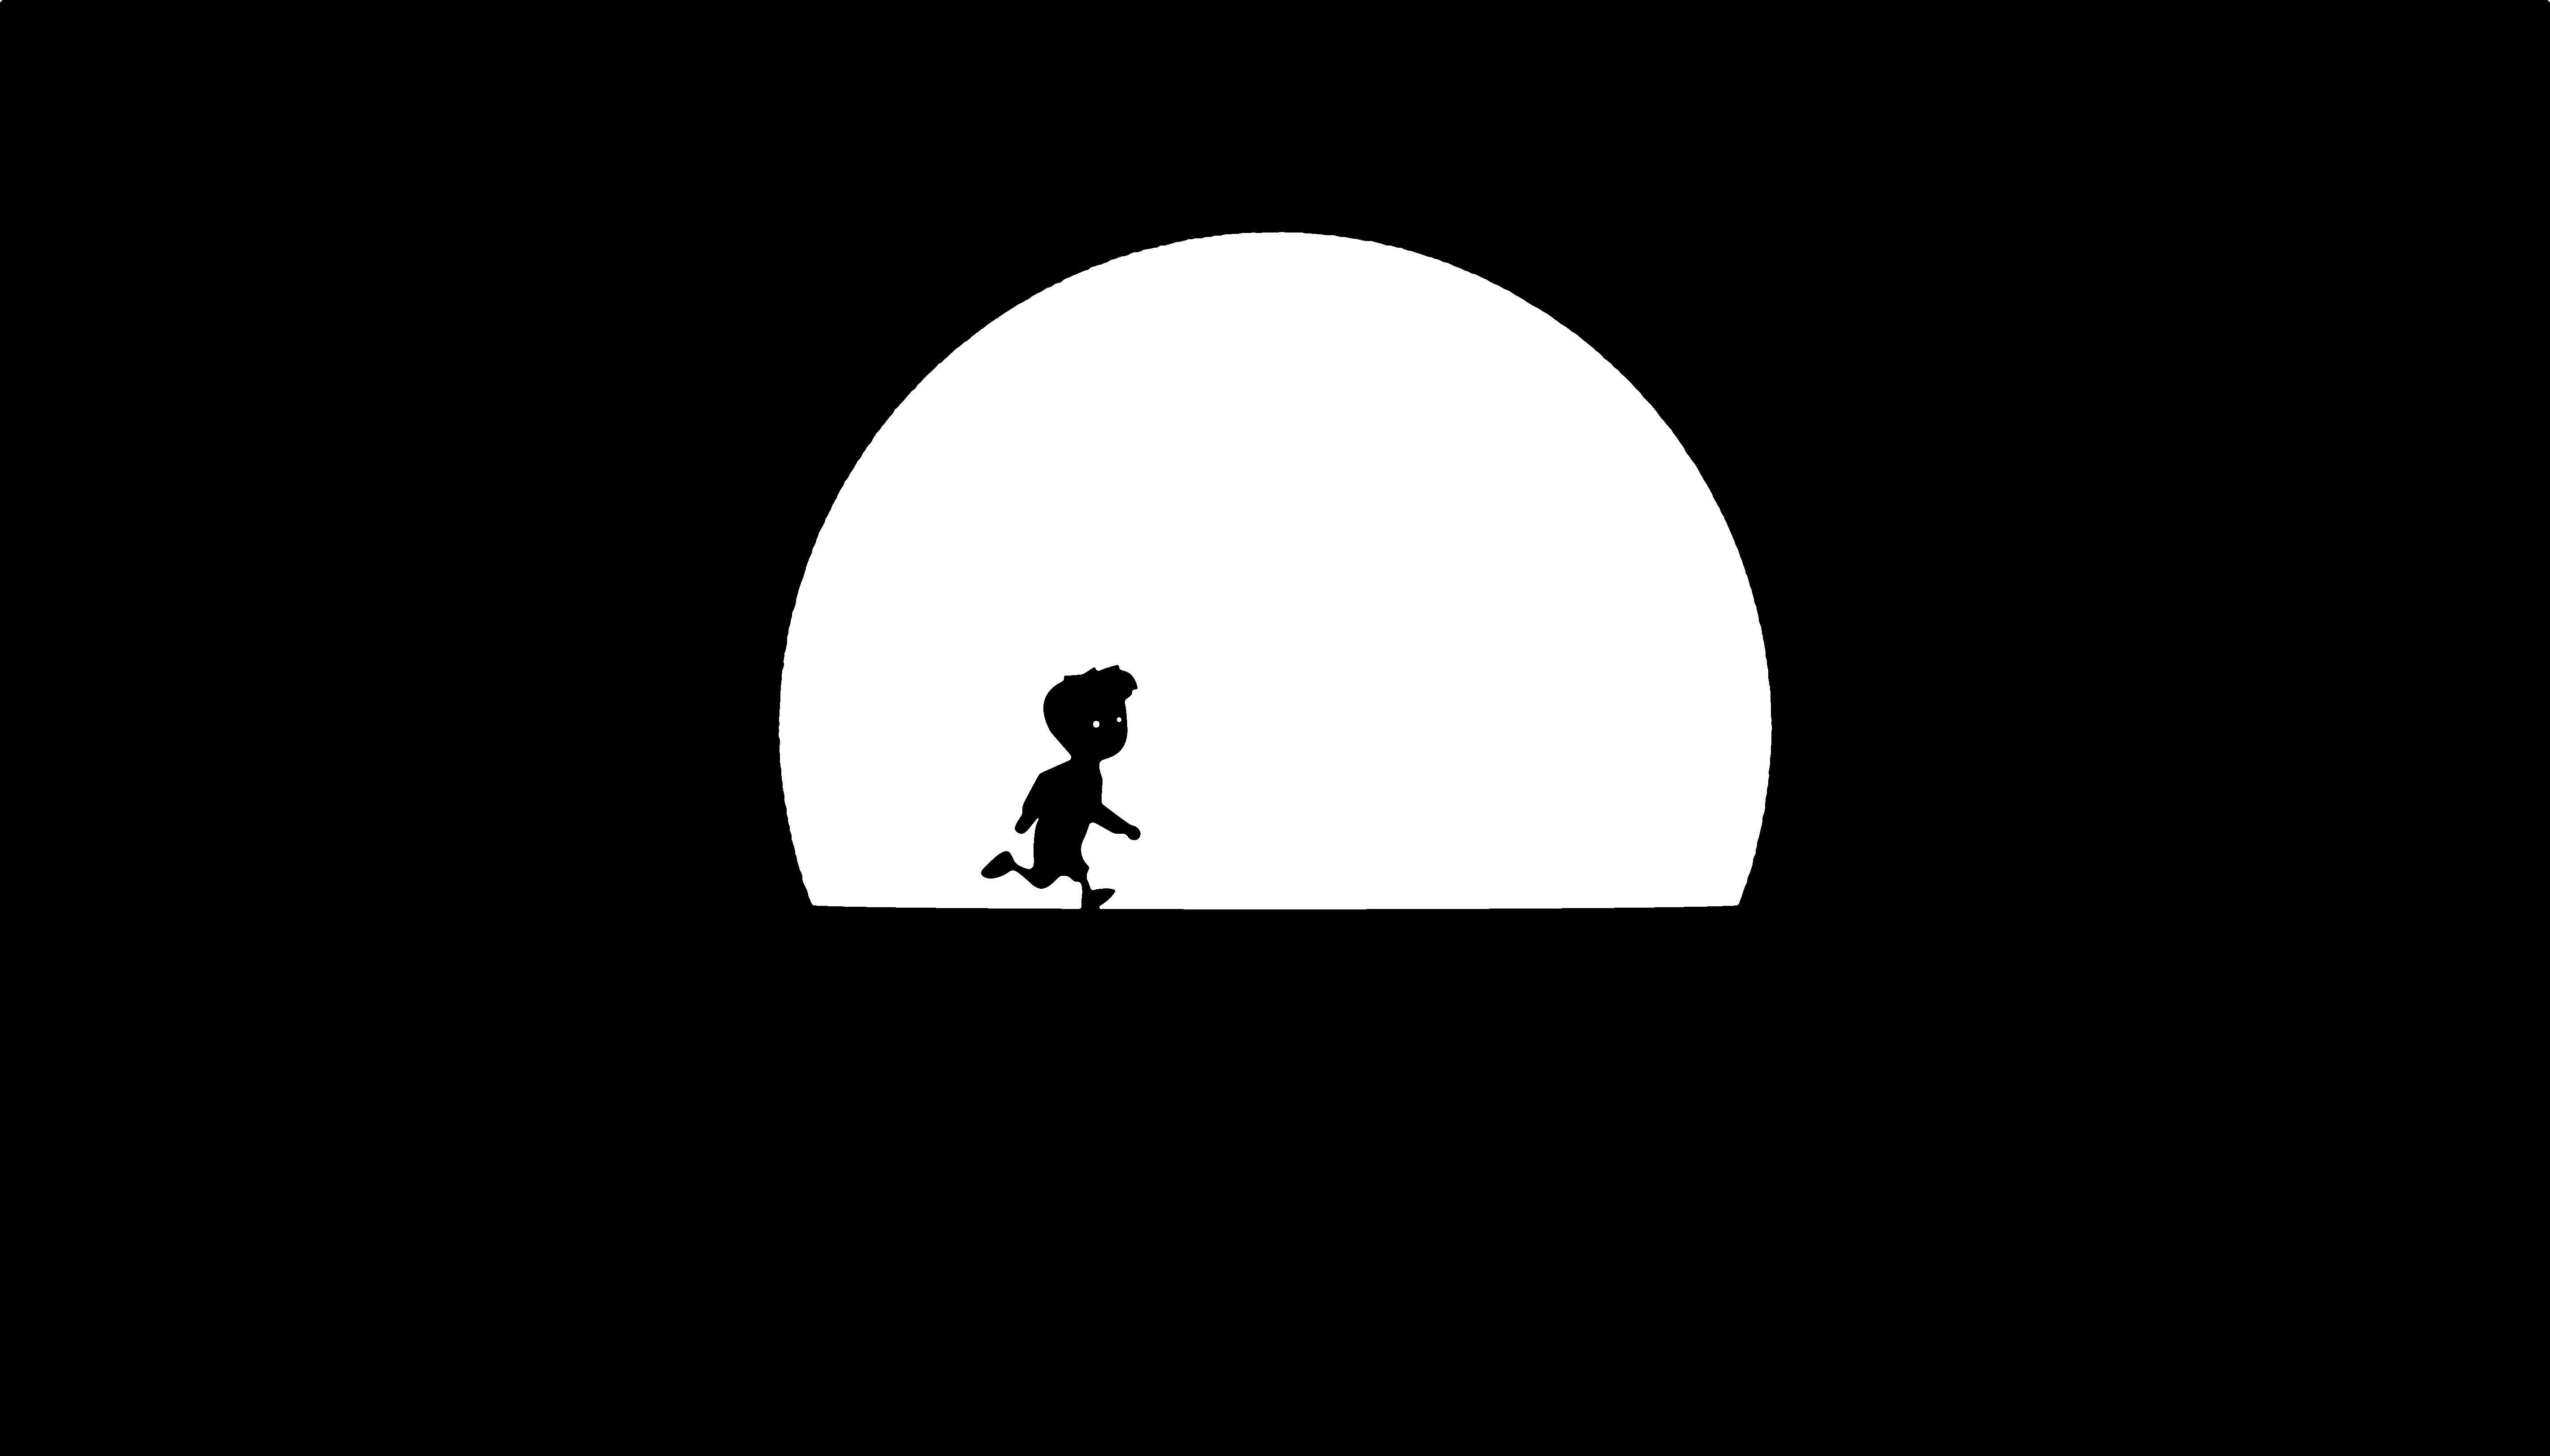 Limbo game Wallpapers by arand4 on DeviantArt